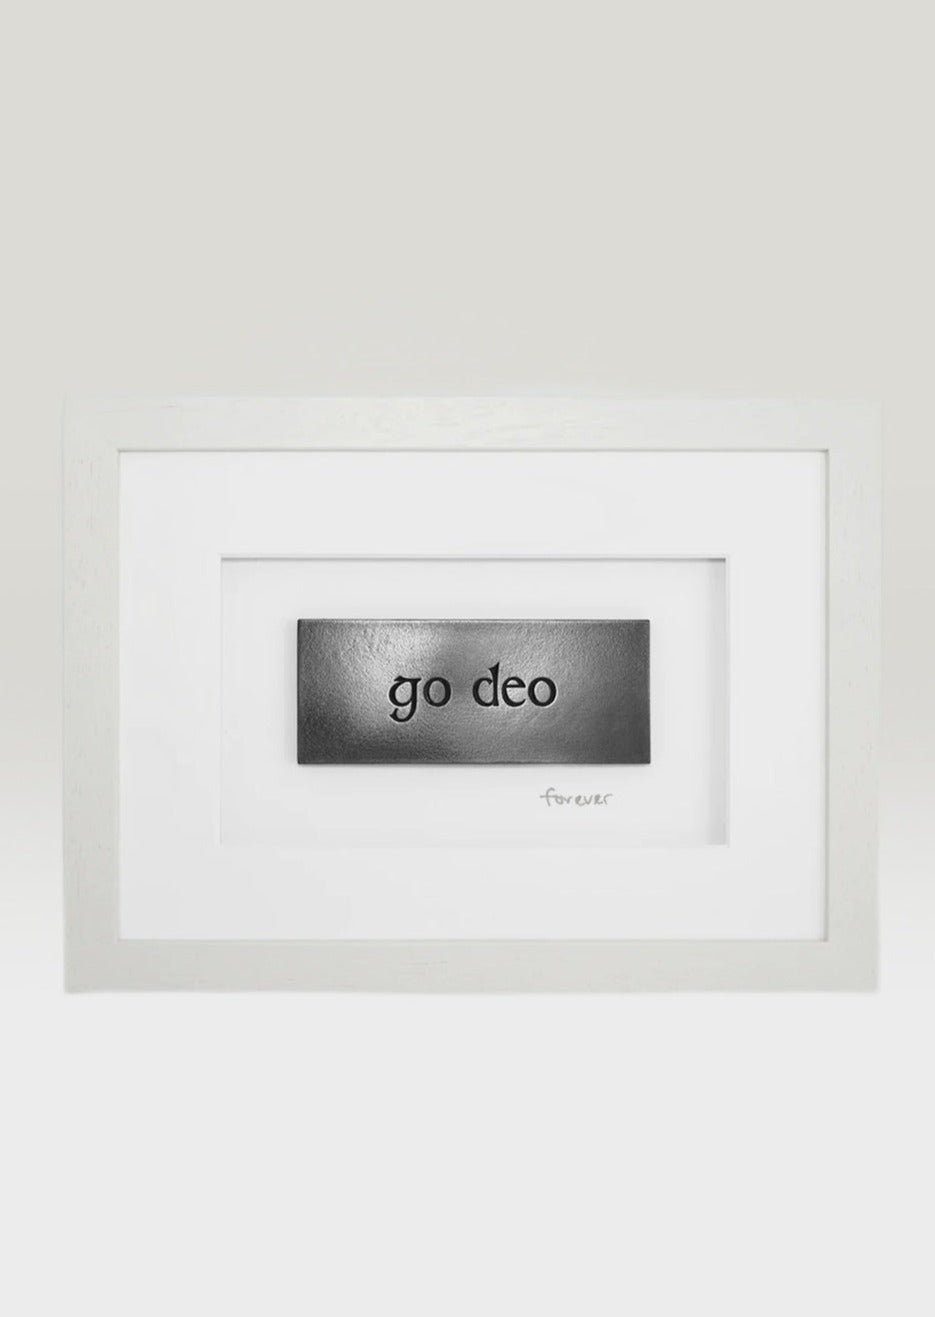 Wild Goose Go Deo Forever Wall Art